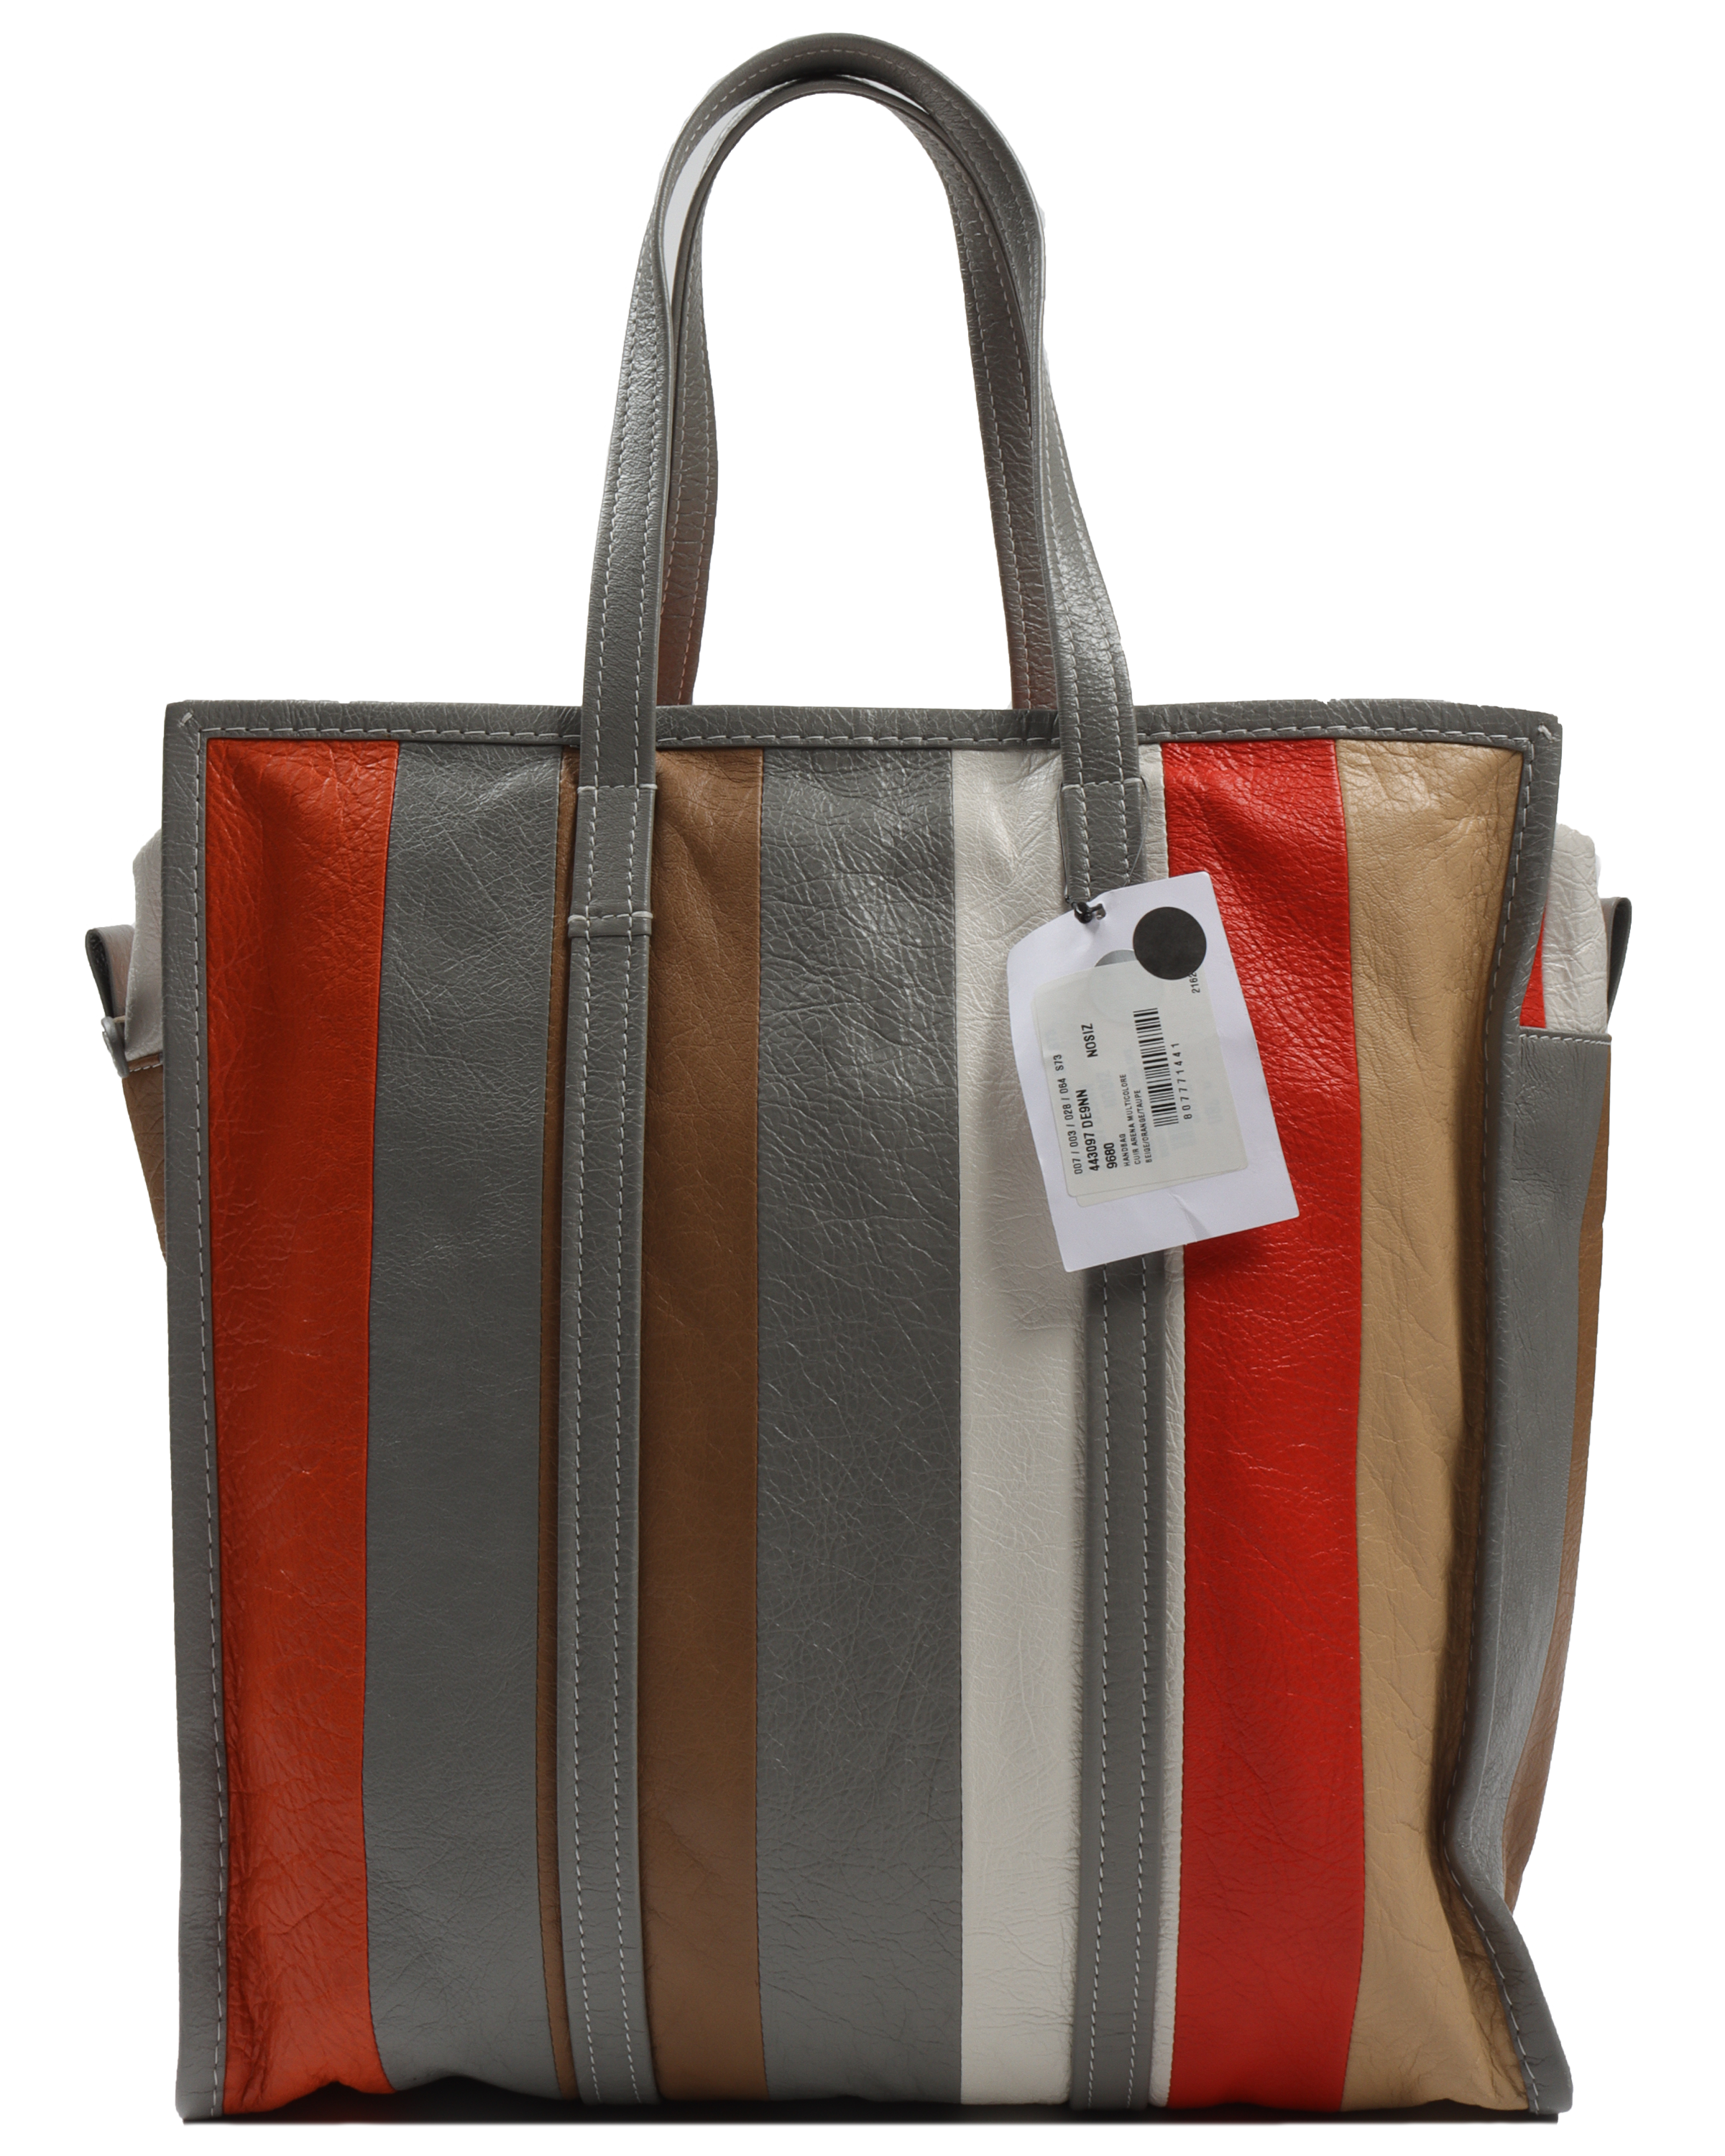 Tan and Red Bazar Bag